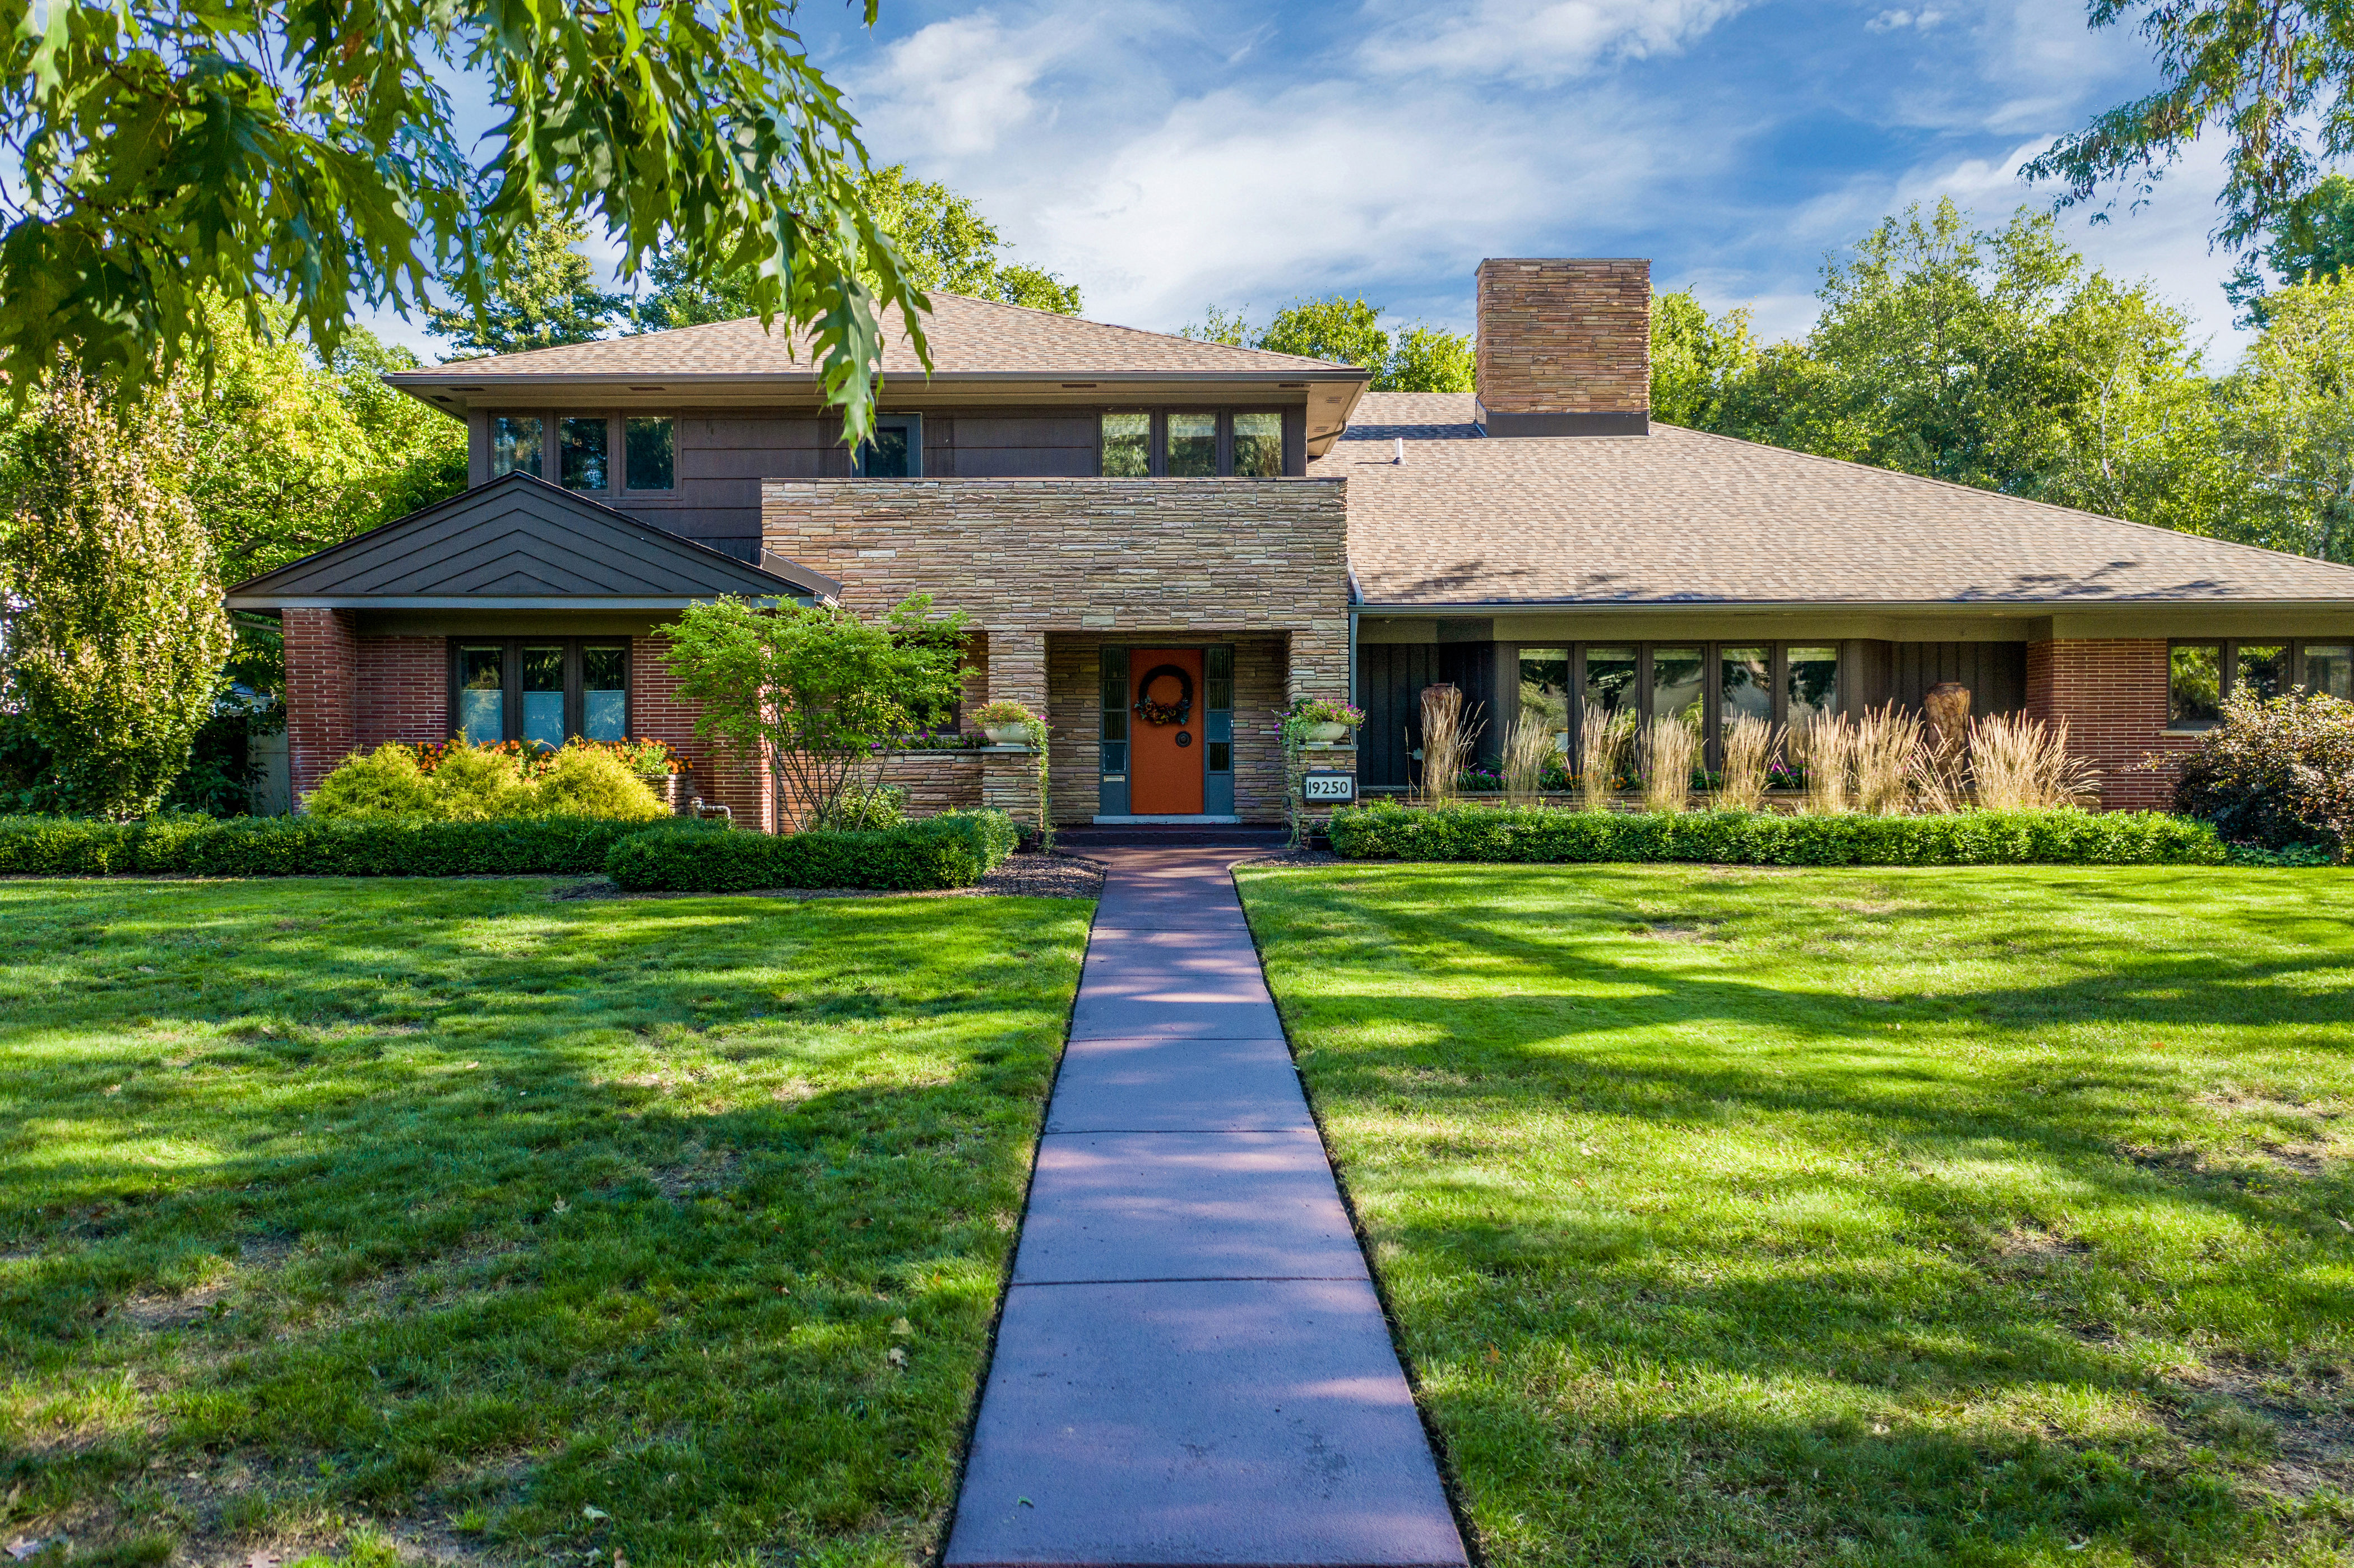 A large lawn and straight cement walkway leads to a long two-story home.